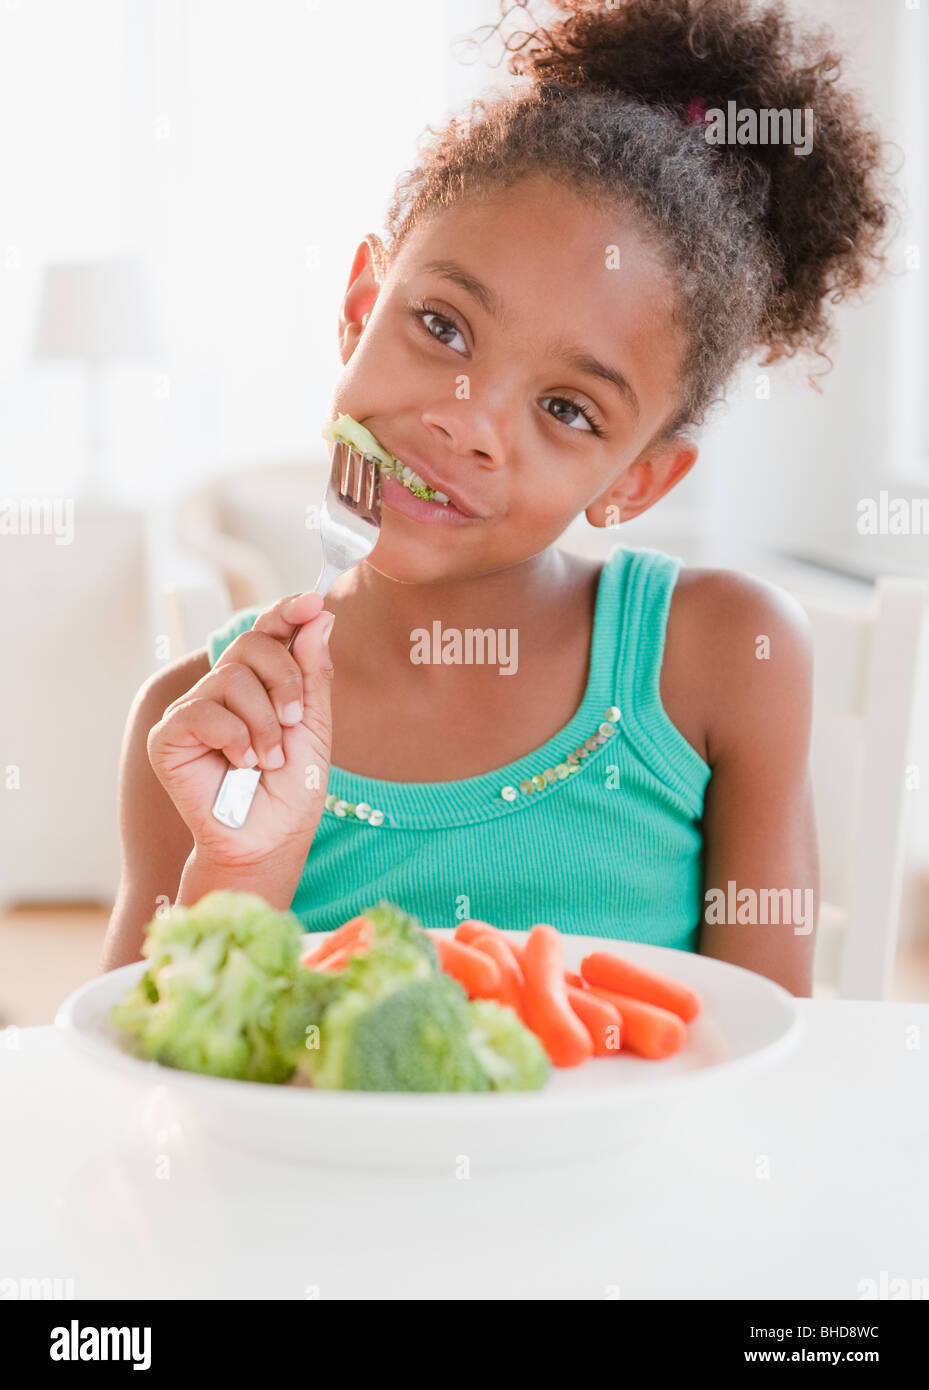 Mixed race girl eating healthy meal Stock Photo